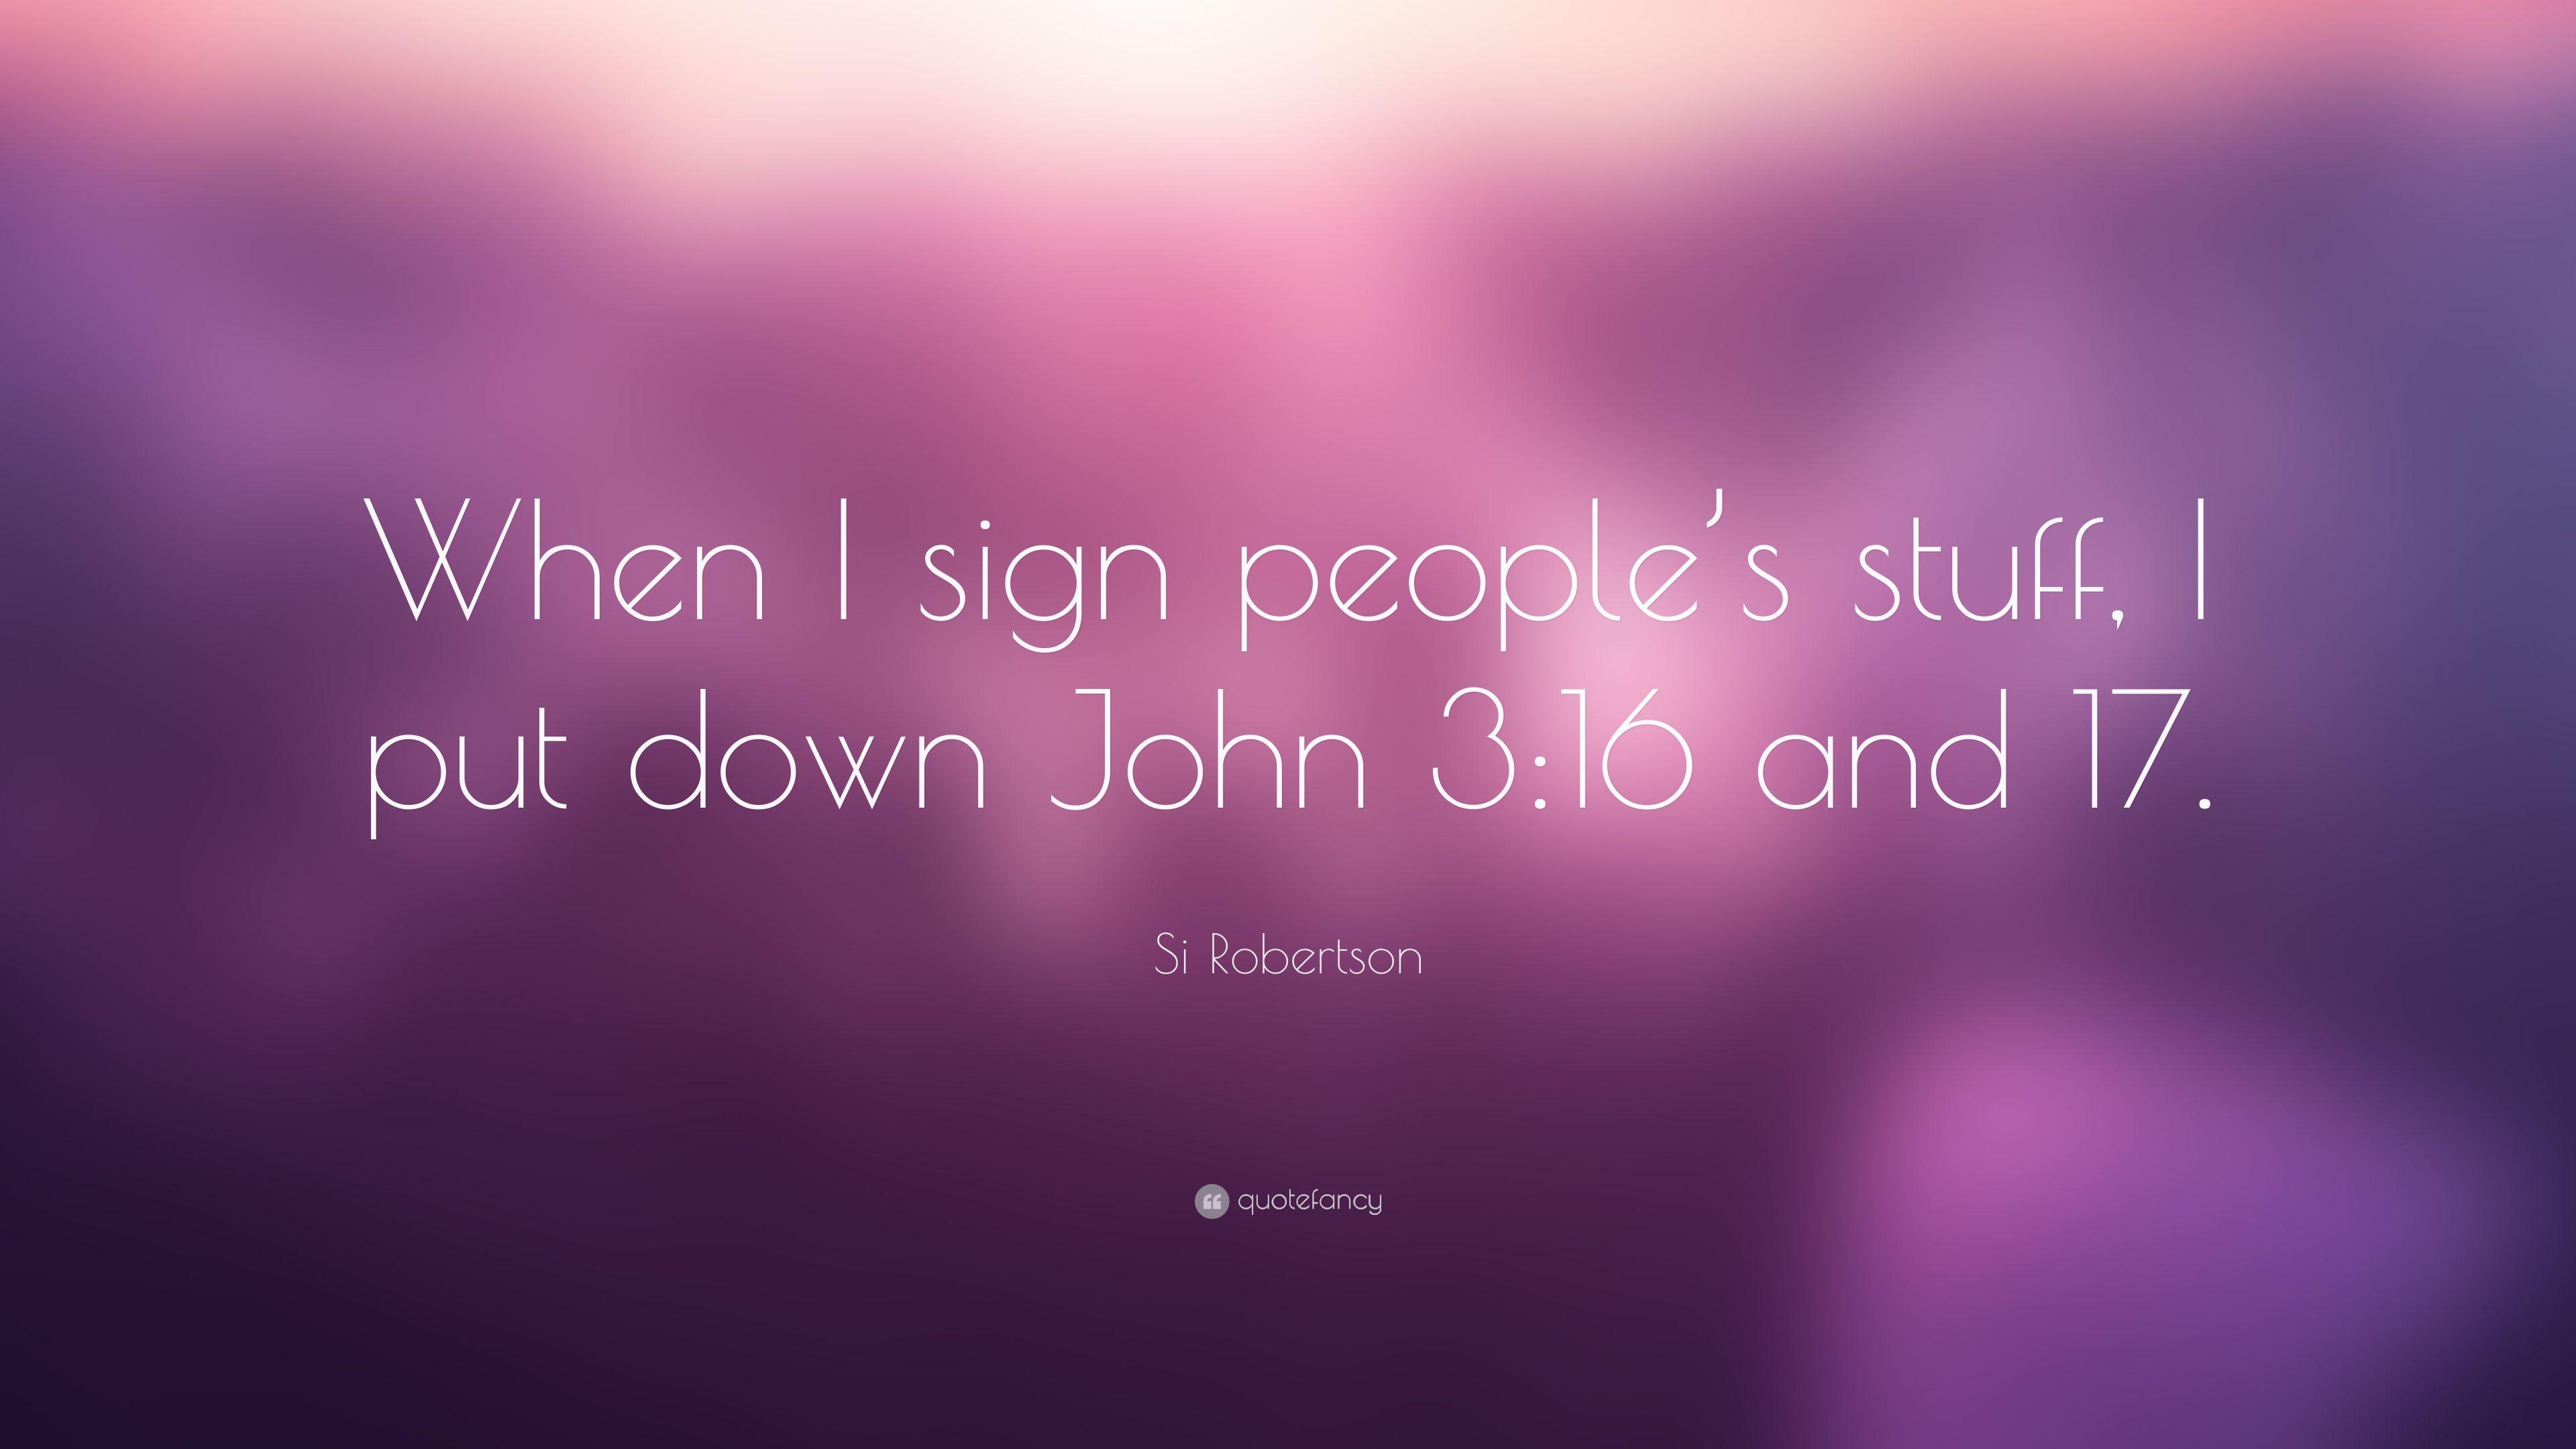 Si Robertson Quote: “When I sign people's stuff, I put down John 3